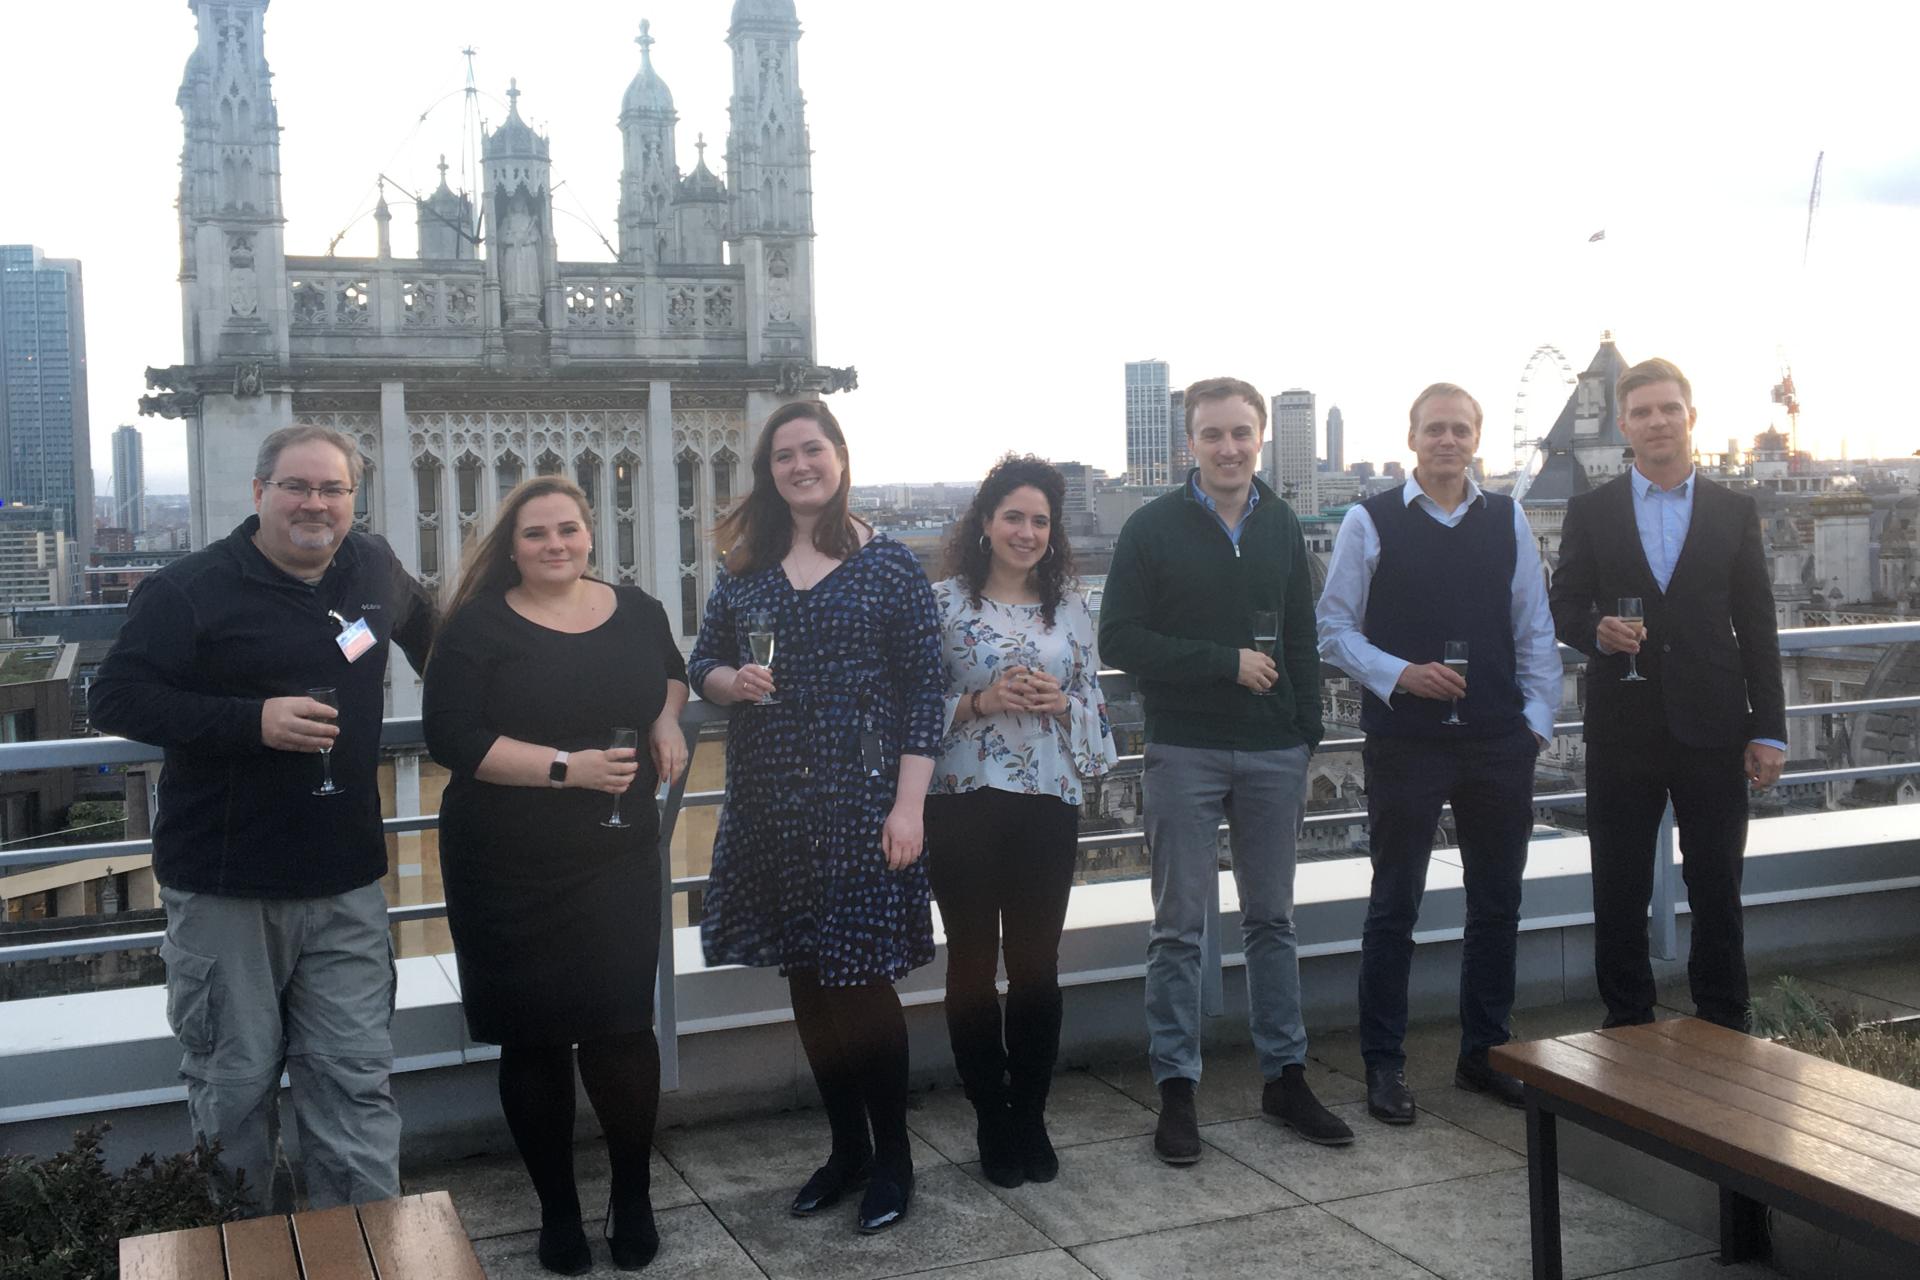 OCCRP journalists and their legal team in London. (Credit: OCCRP)